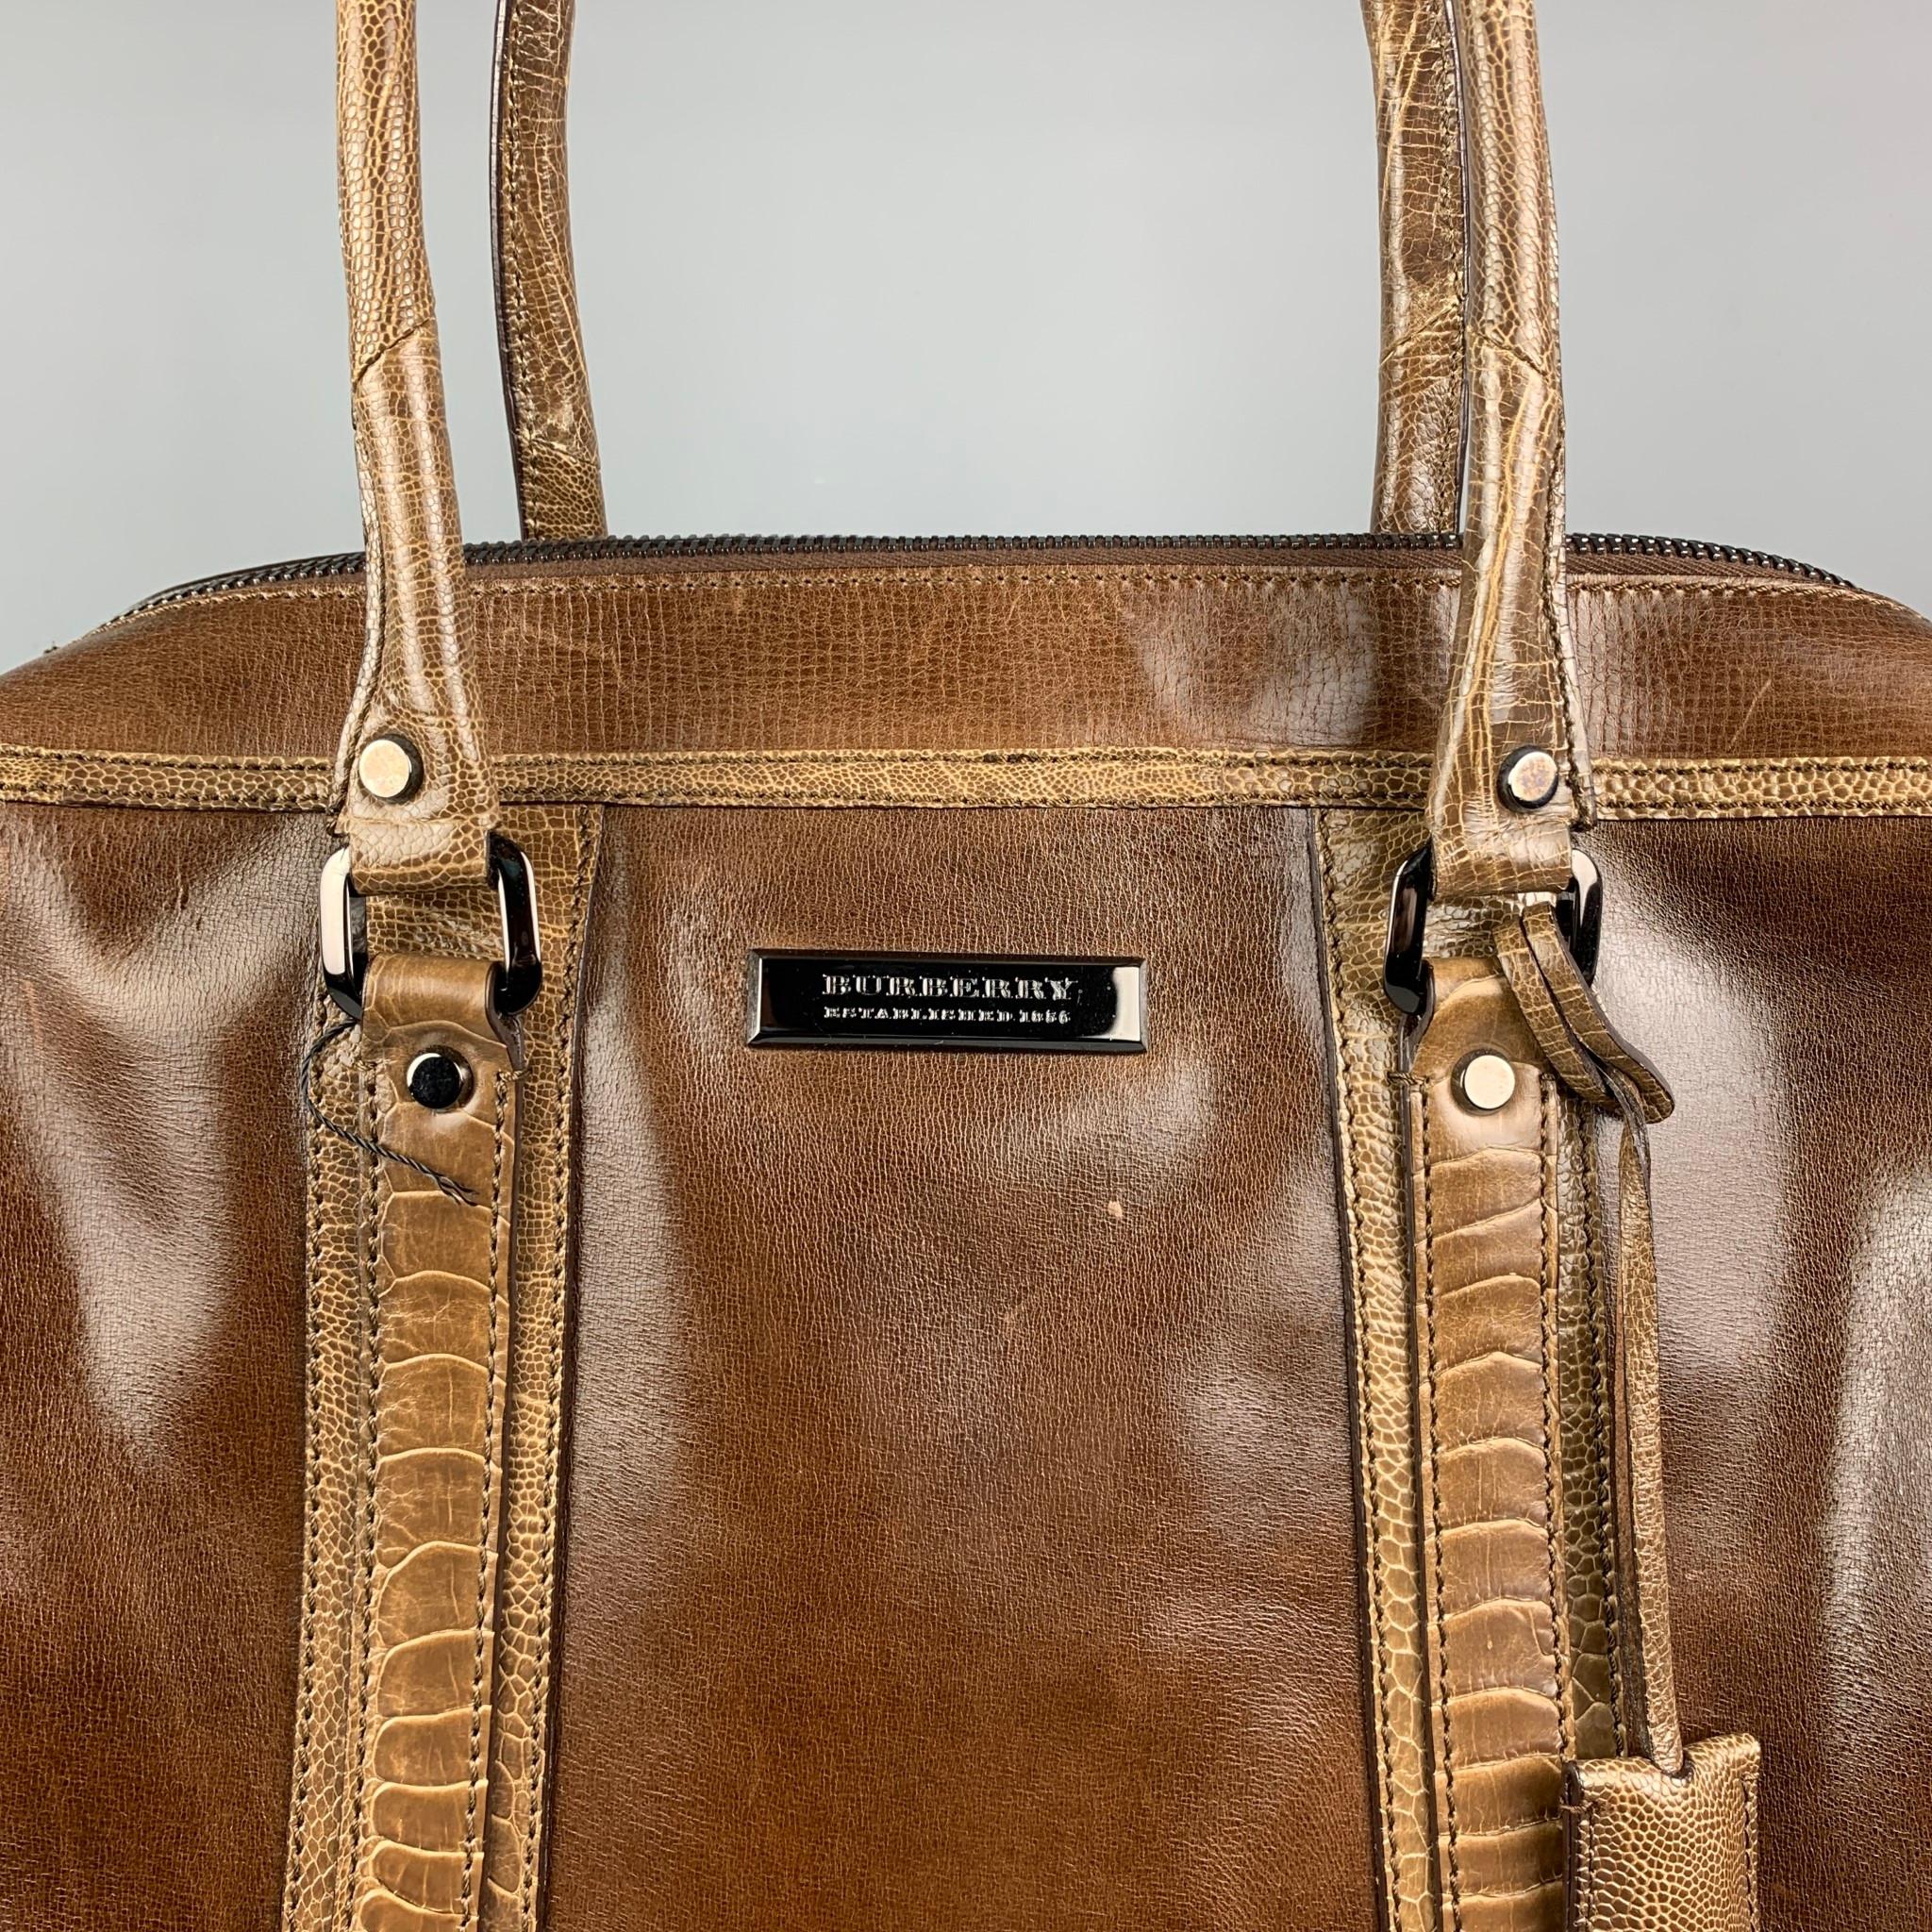 Early Burberry Prorsum Fall 2008 Brown Leather Tote by Christopher Bailey featuring mocha leather, gunmetal hardware, ostrich trim, dual shoulder straps. Interior features a jacquard lining and three interior pockets. Zip Closure at the top of the